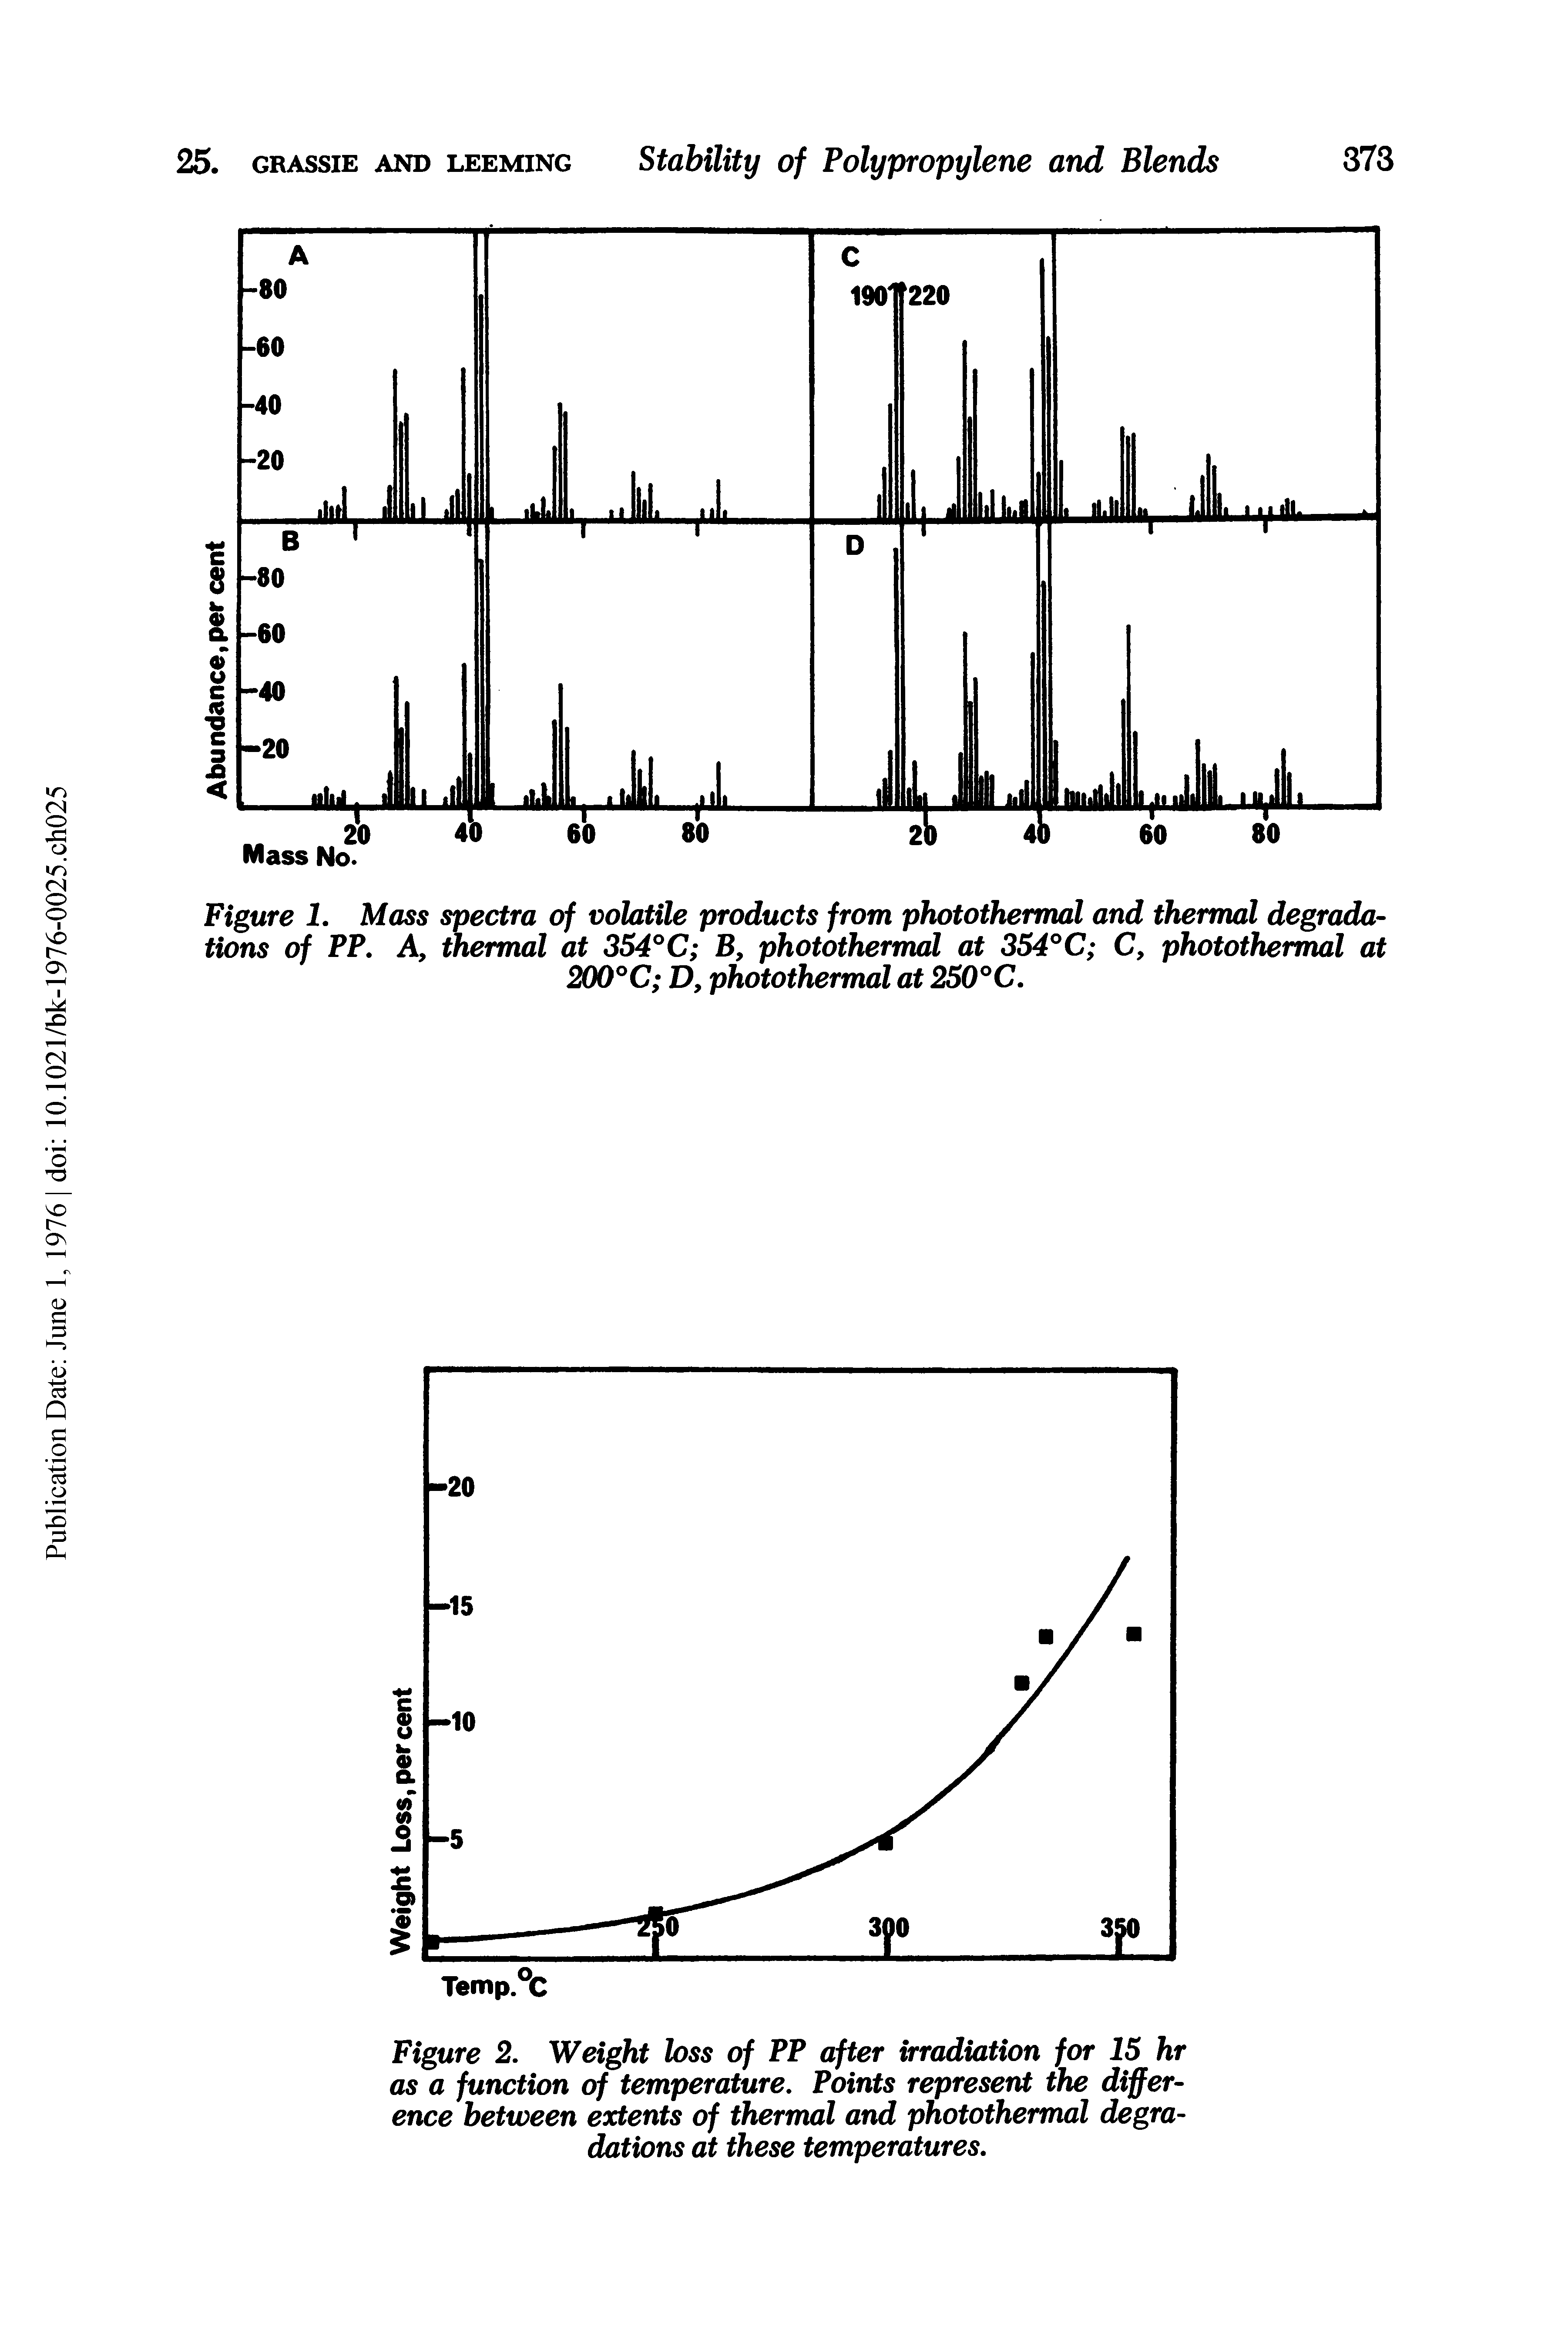 Figure 1. Mass spectra of volatile products from photothermal and thermal degradations of PP. A, thermal at 354°C B, photothermal at 354°C C, photothermal at 200°C D, photothermal at 250°C.